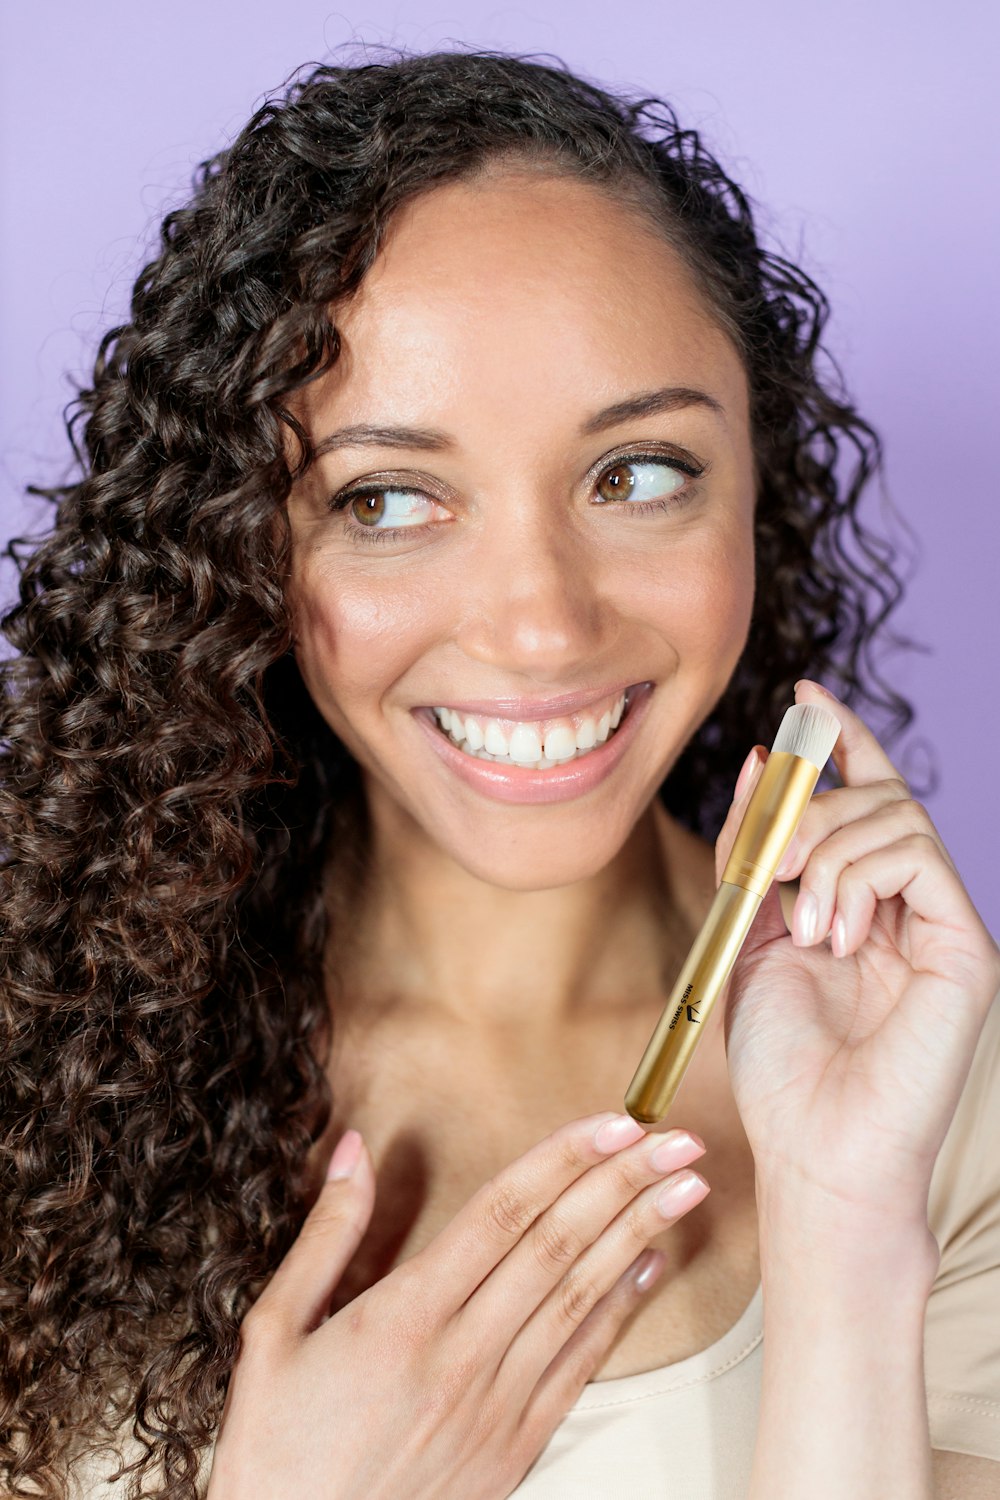 woman holding gold pen smiling